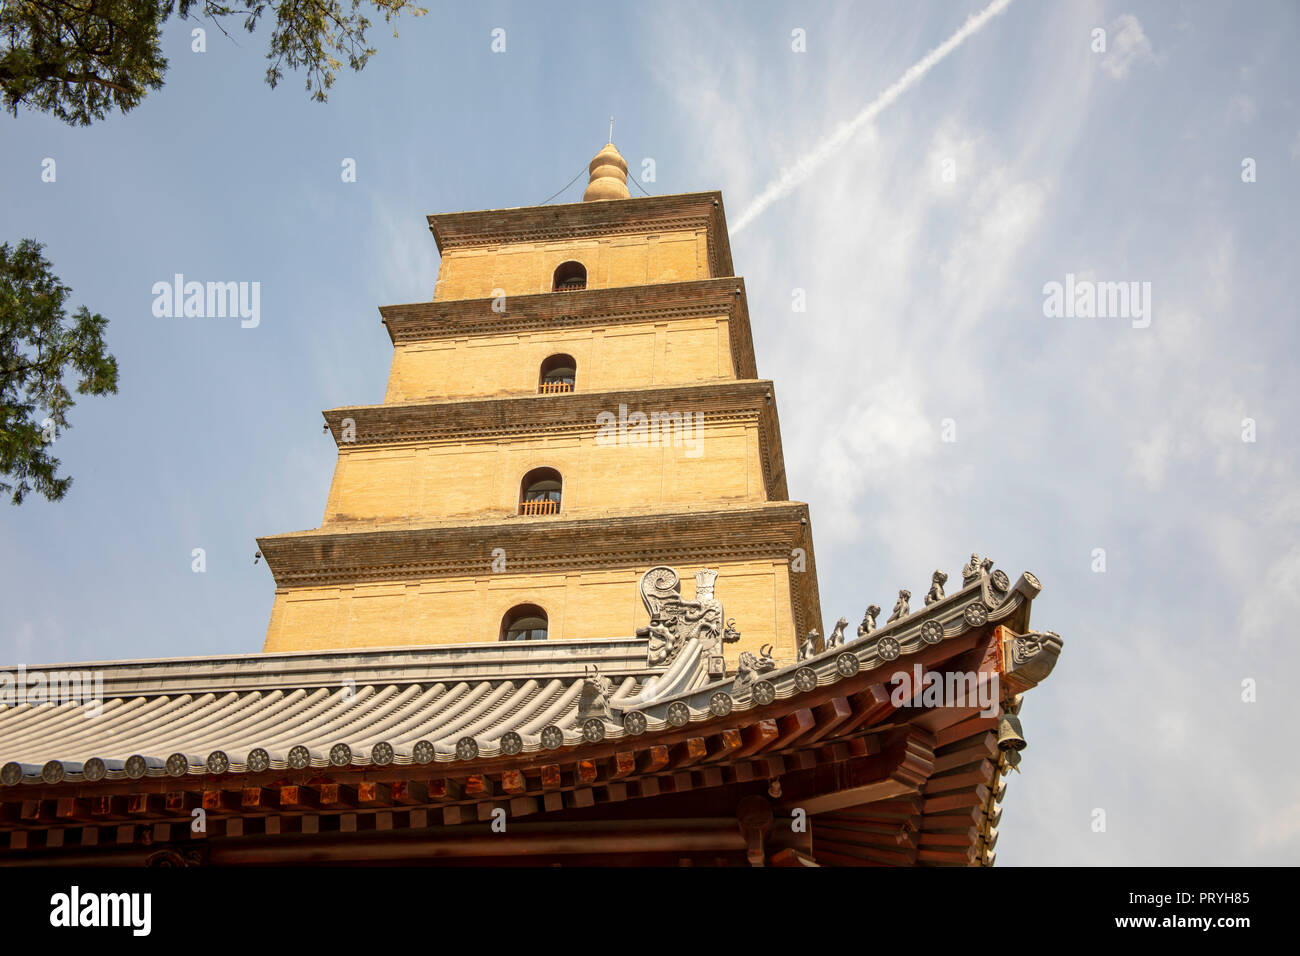 Roof details on Big WIld Goose Pagoda in Xi'an, Shaanxi Providence, China against blue skies on sunny day. Stock Photo